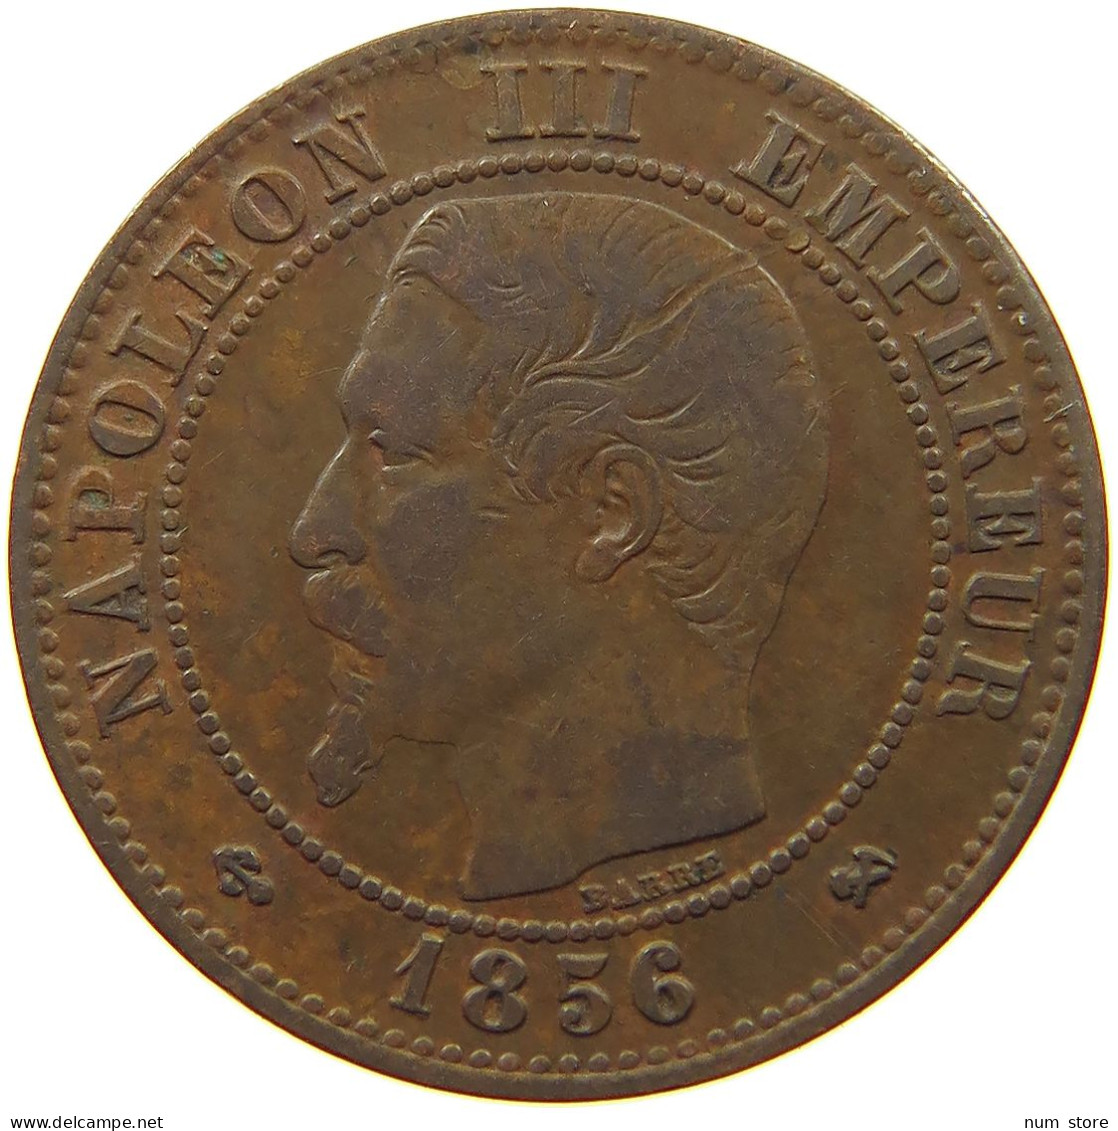 FRANCE 2 CENTIMES 1856 B Napoleon III. (1852-1870) #a093 0519 - 2 Centimes